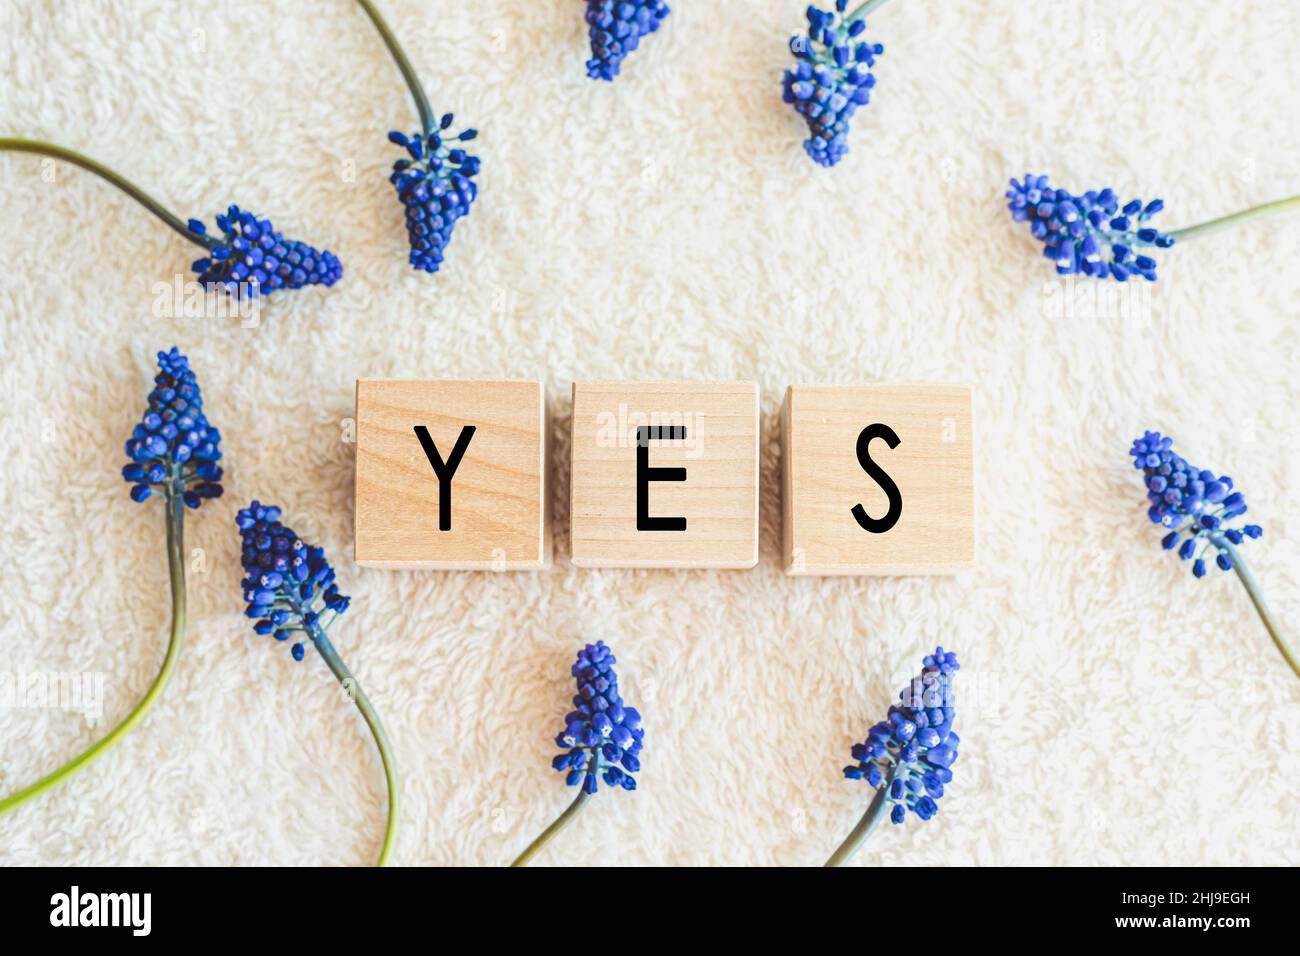 The word Yes written in black letters on wood blocks Stock Photo